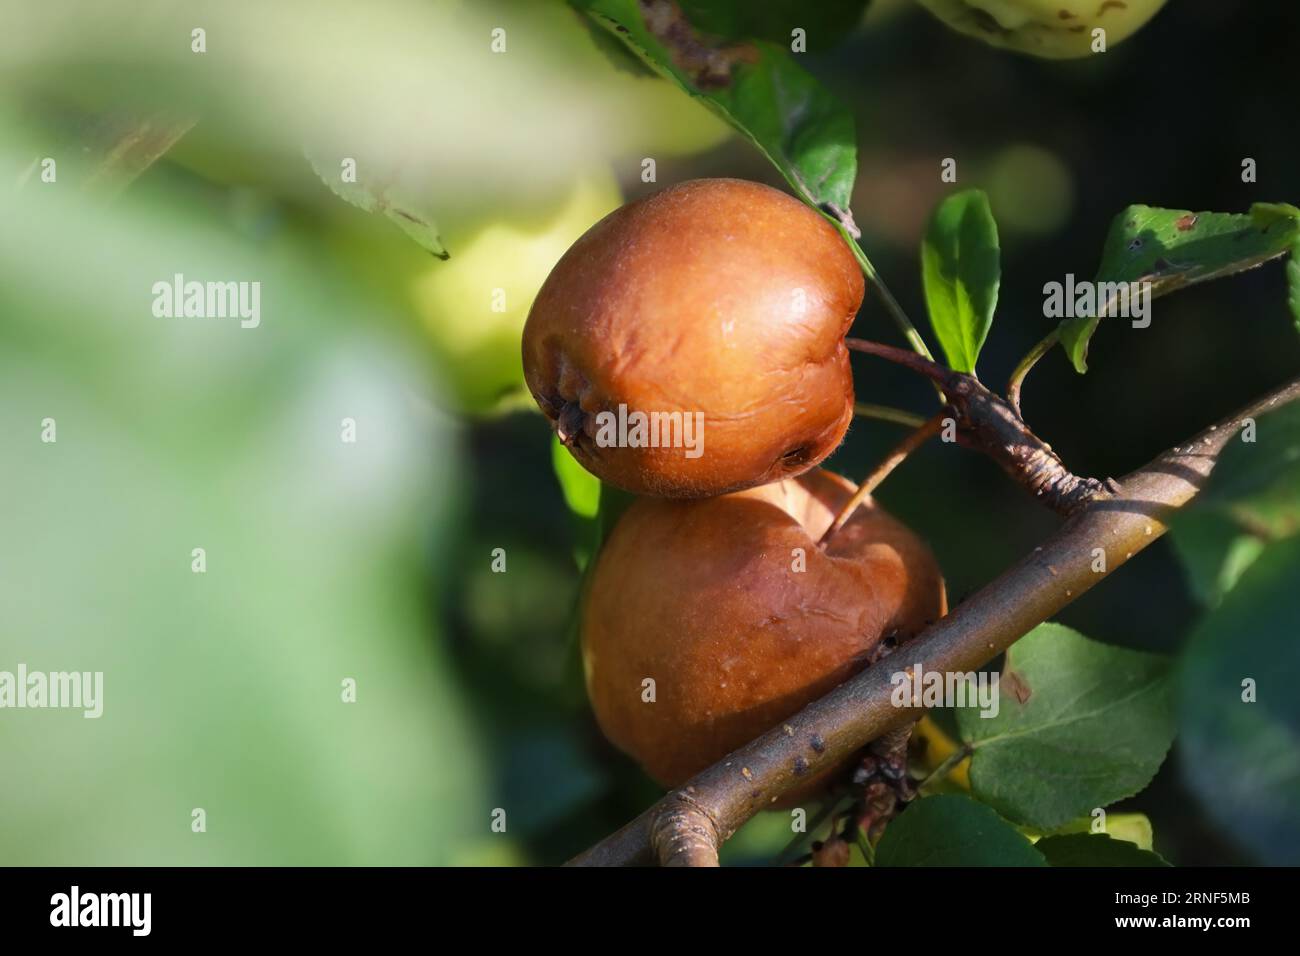 Rotten apples on branch in autumn. Fruits Infected by the Apple Monilia fructigena. Abstract fall natural background. Spoiled crop of apple. Farming Stock Photo